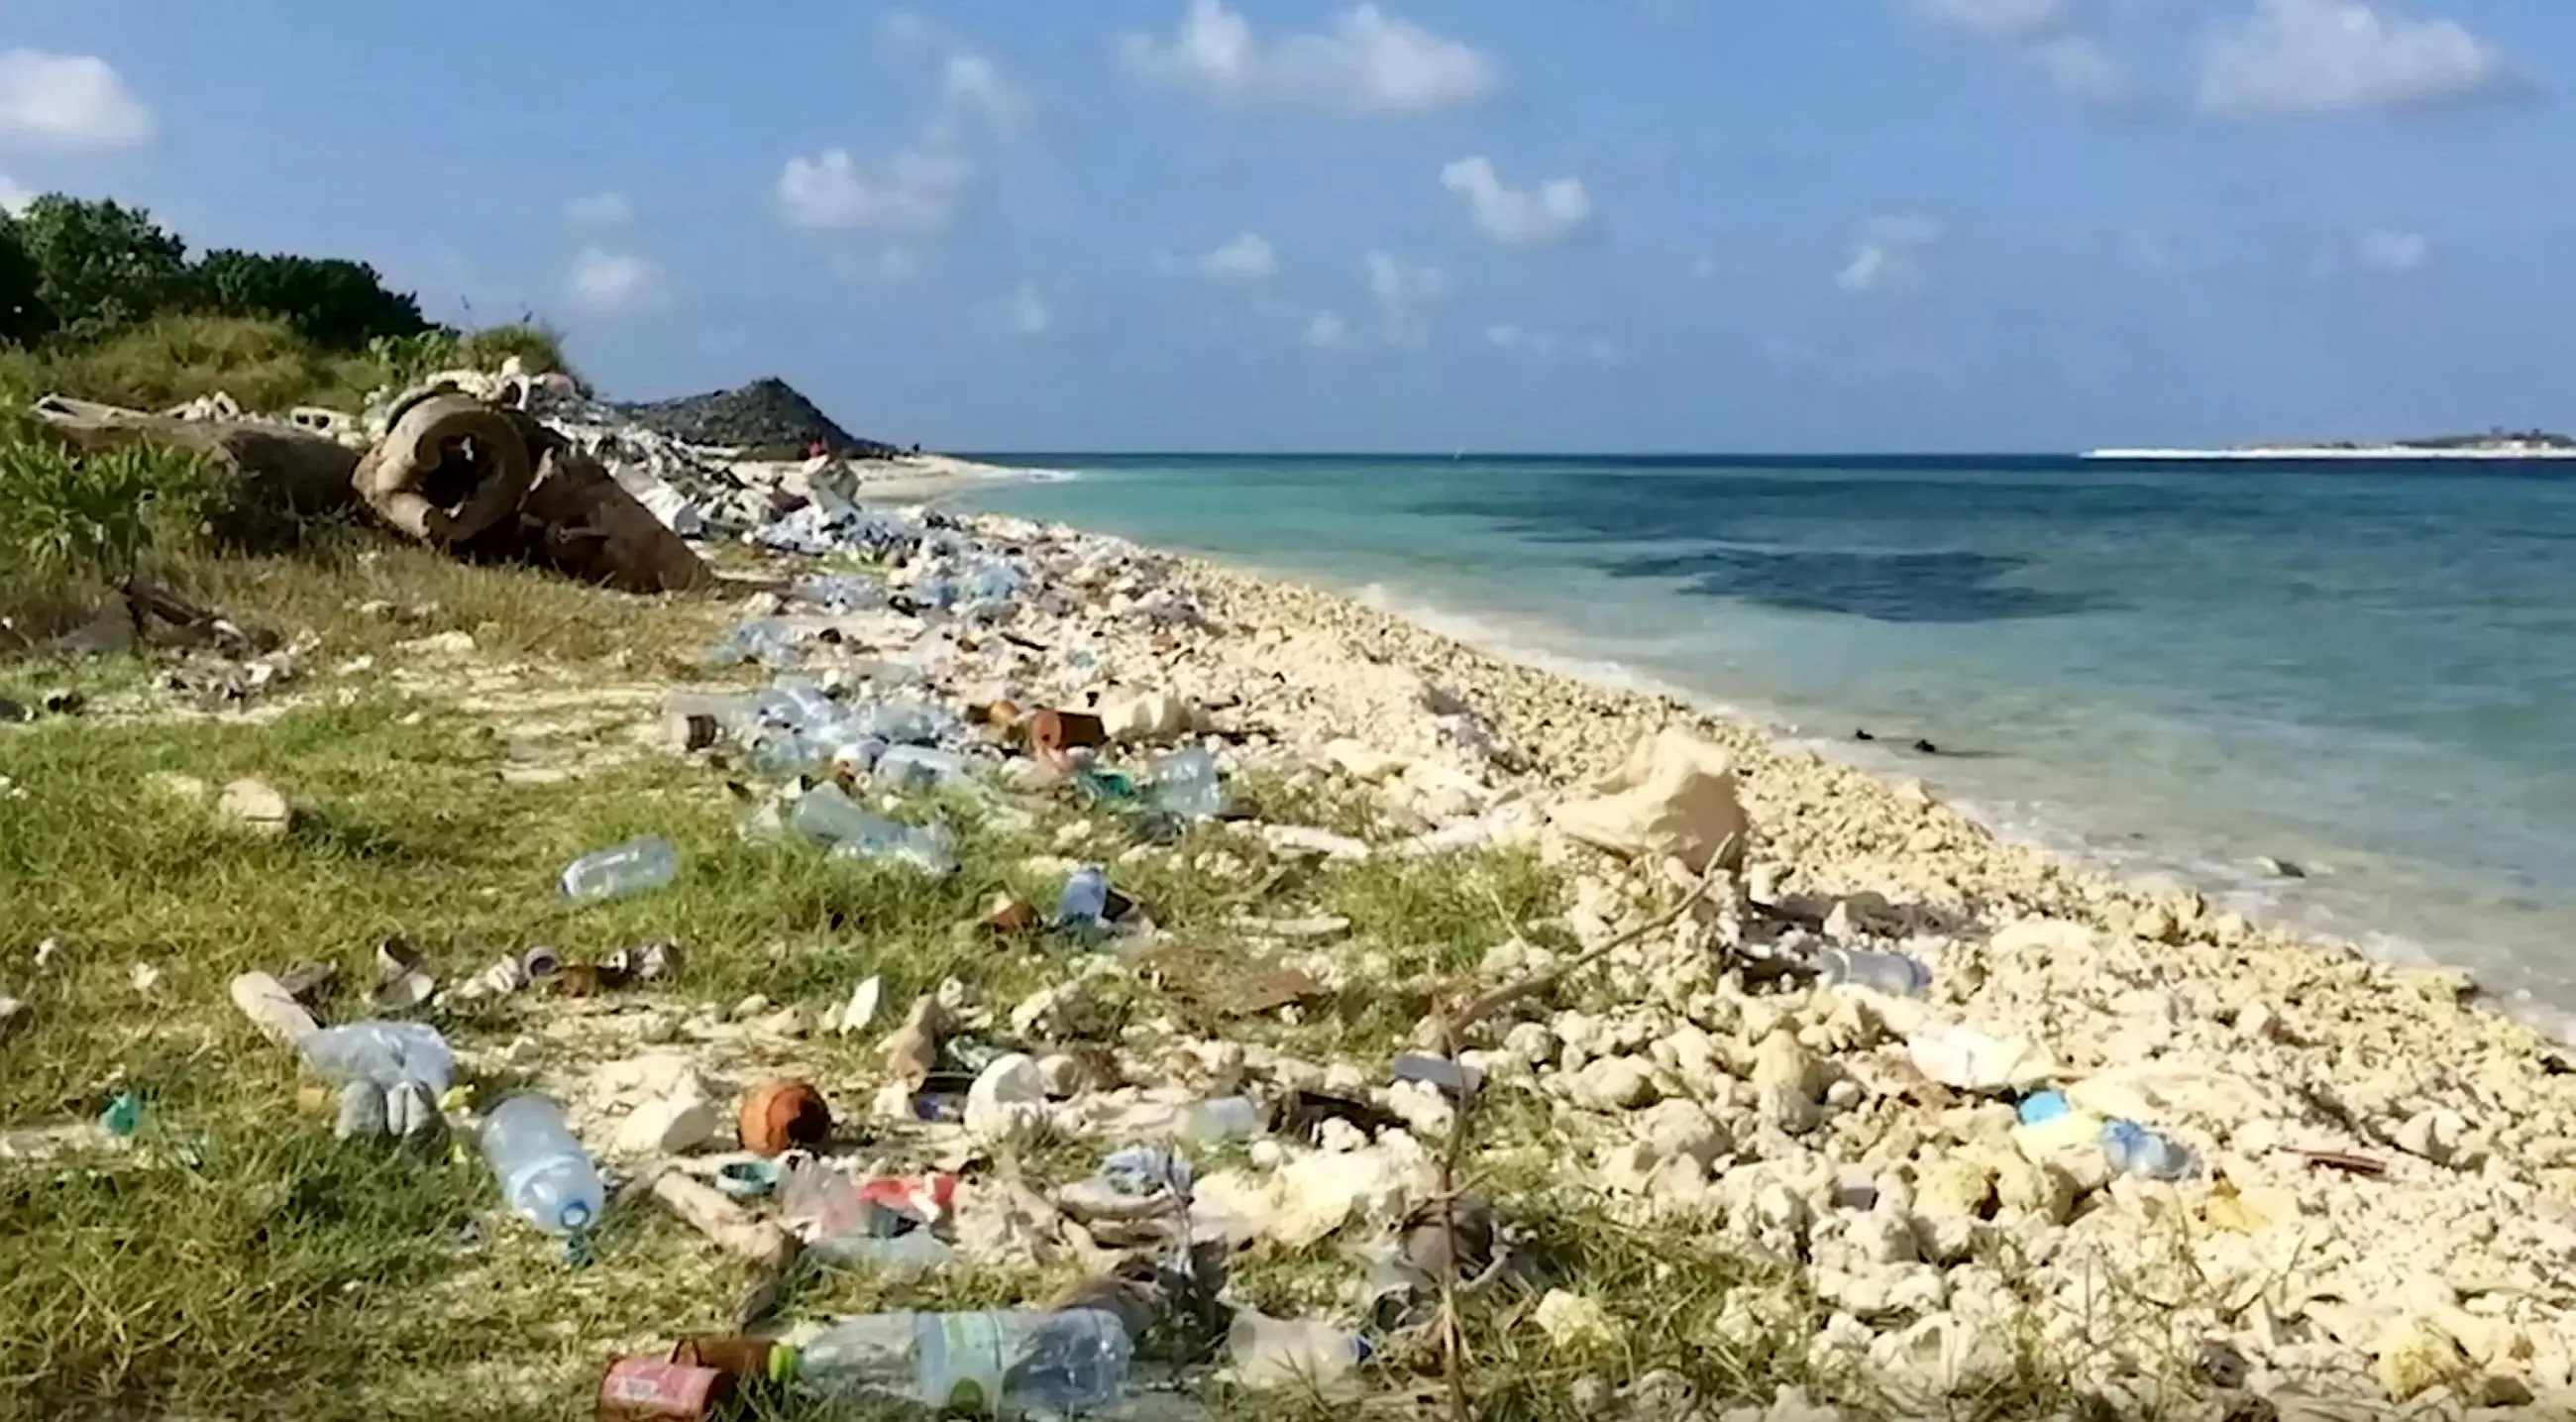 The Maldives' oceans are now home to the most microplastics in the world (